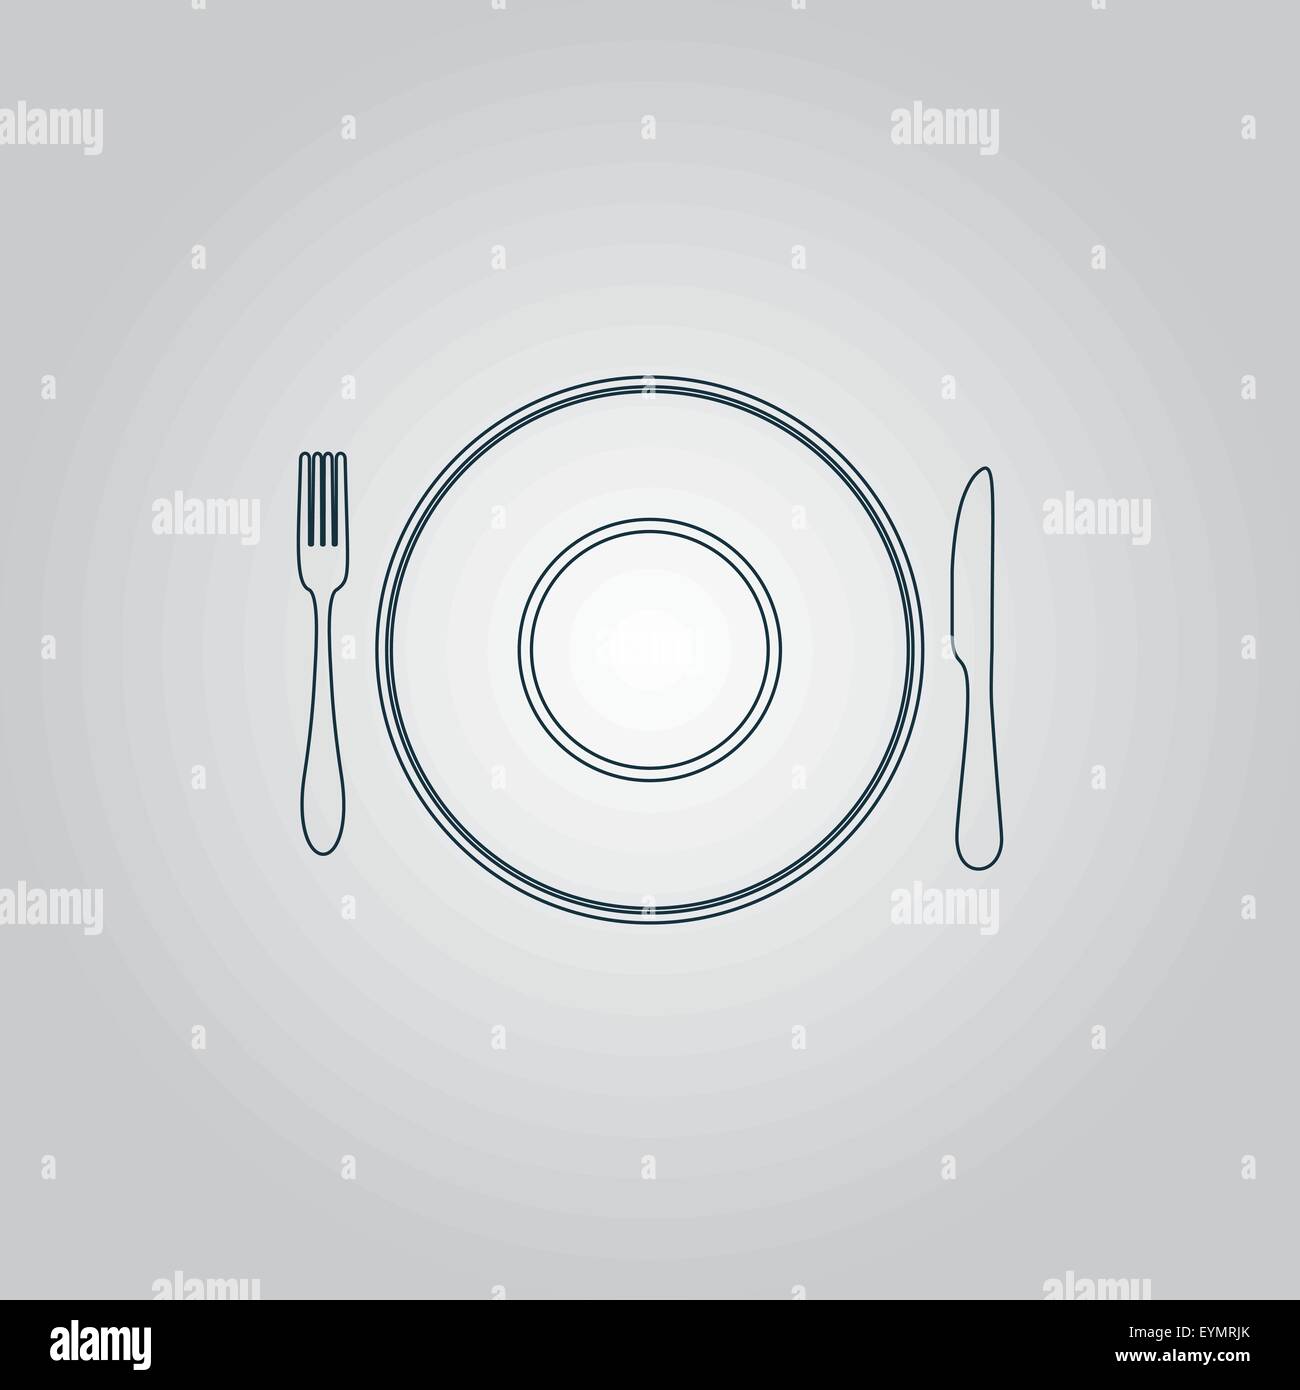 Plate dish with fork and knife Stock Vector